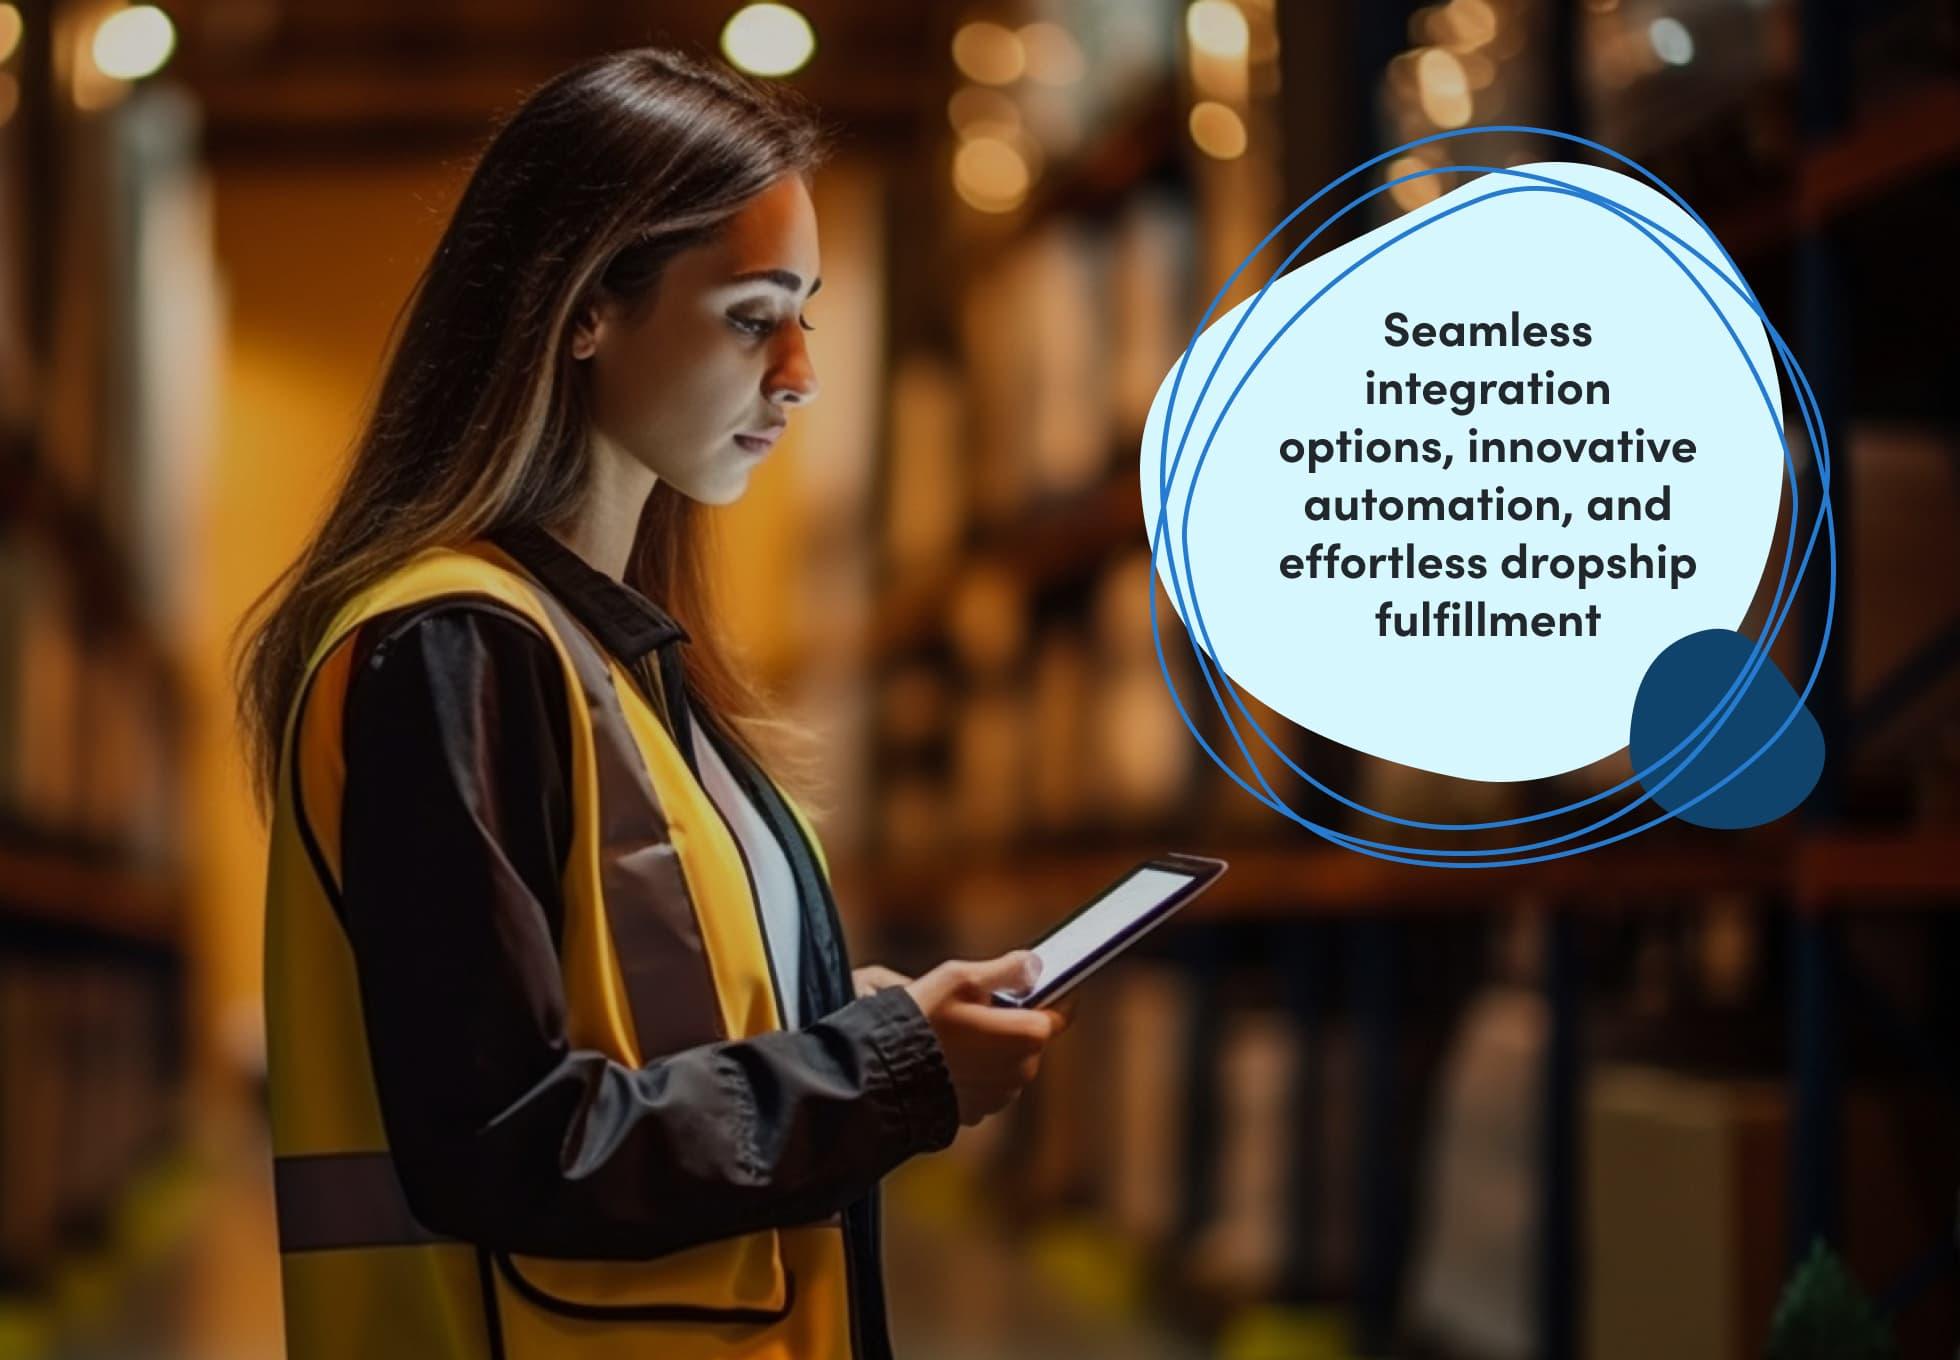 A person wearing a safety vest standing in a warehouse and holding an iPad. A sentenced imposed over the image says, "Seamless intefration options, innovative automation, and effortless dropship fulfillment."